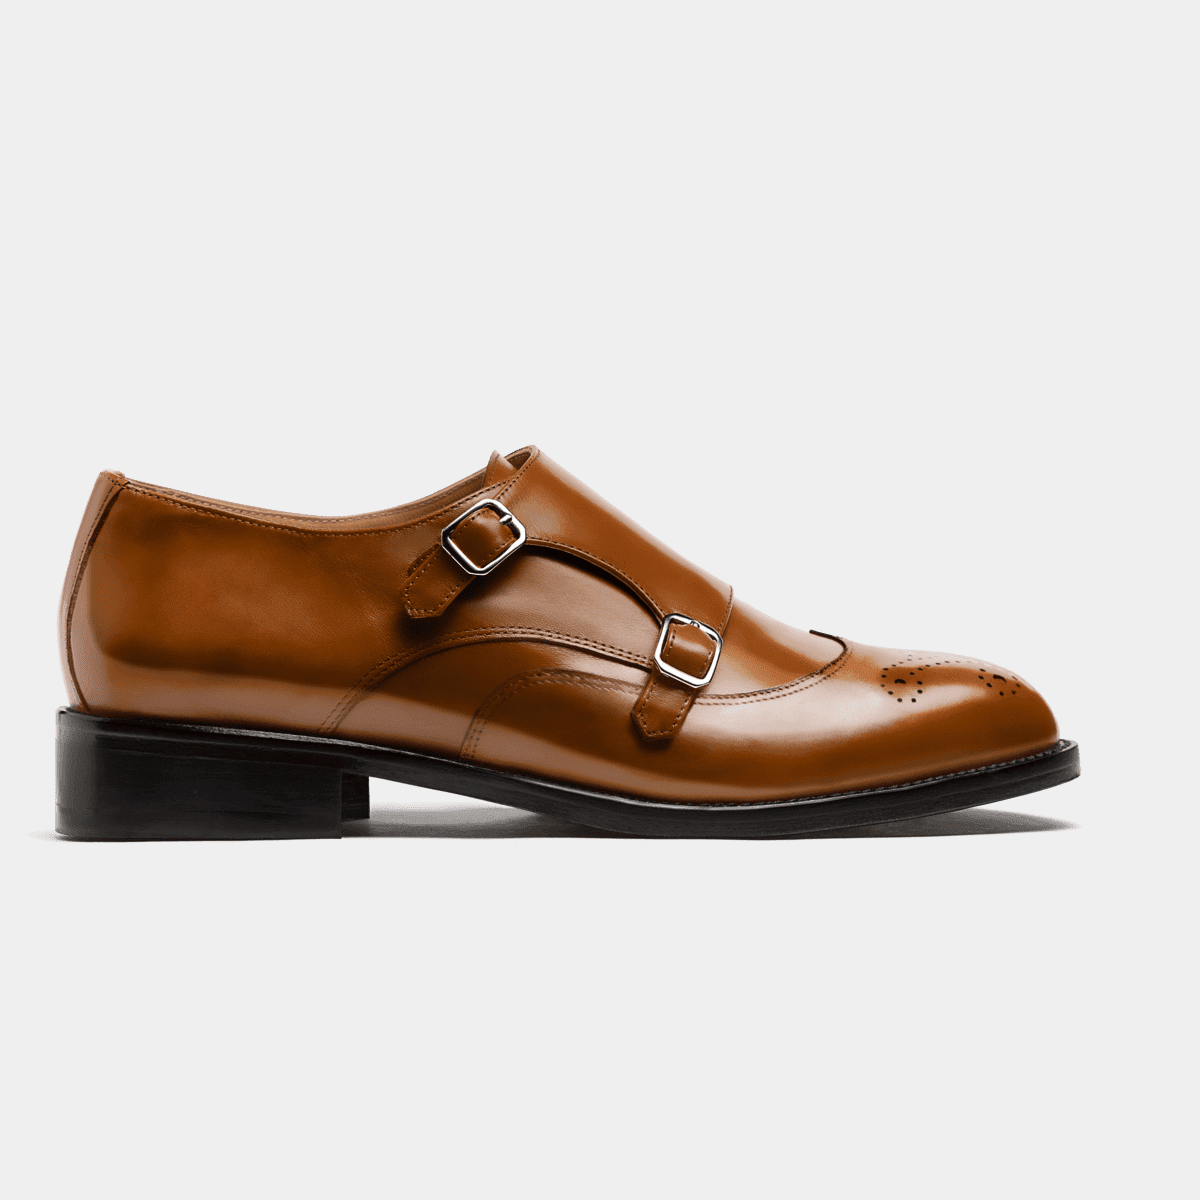 Wingtip Double monk strap shoes - brown flora leather | Sumissura